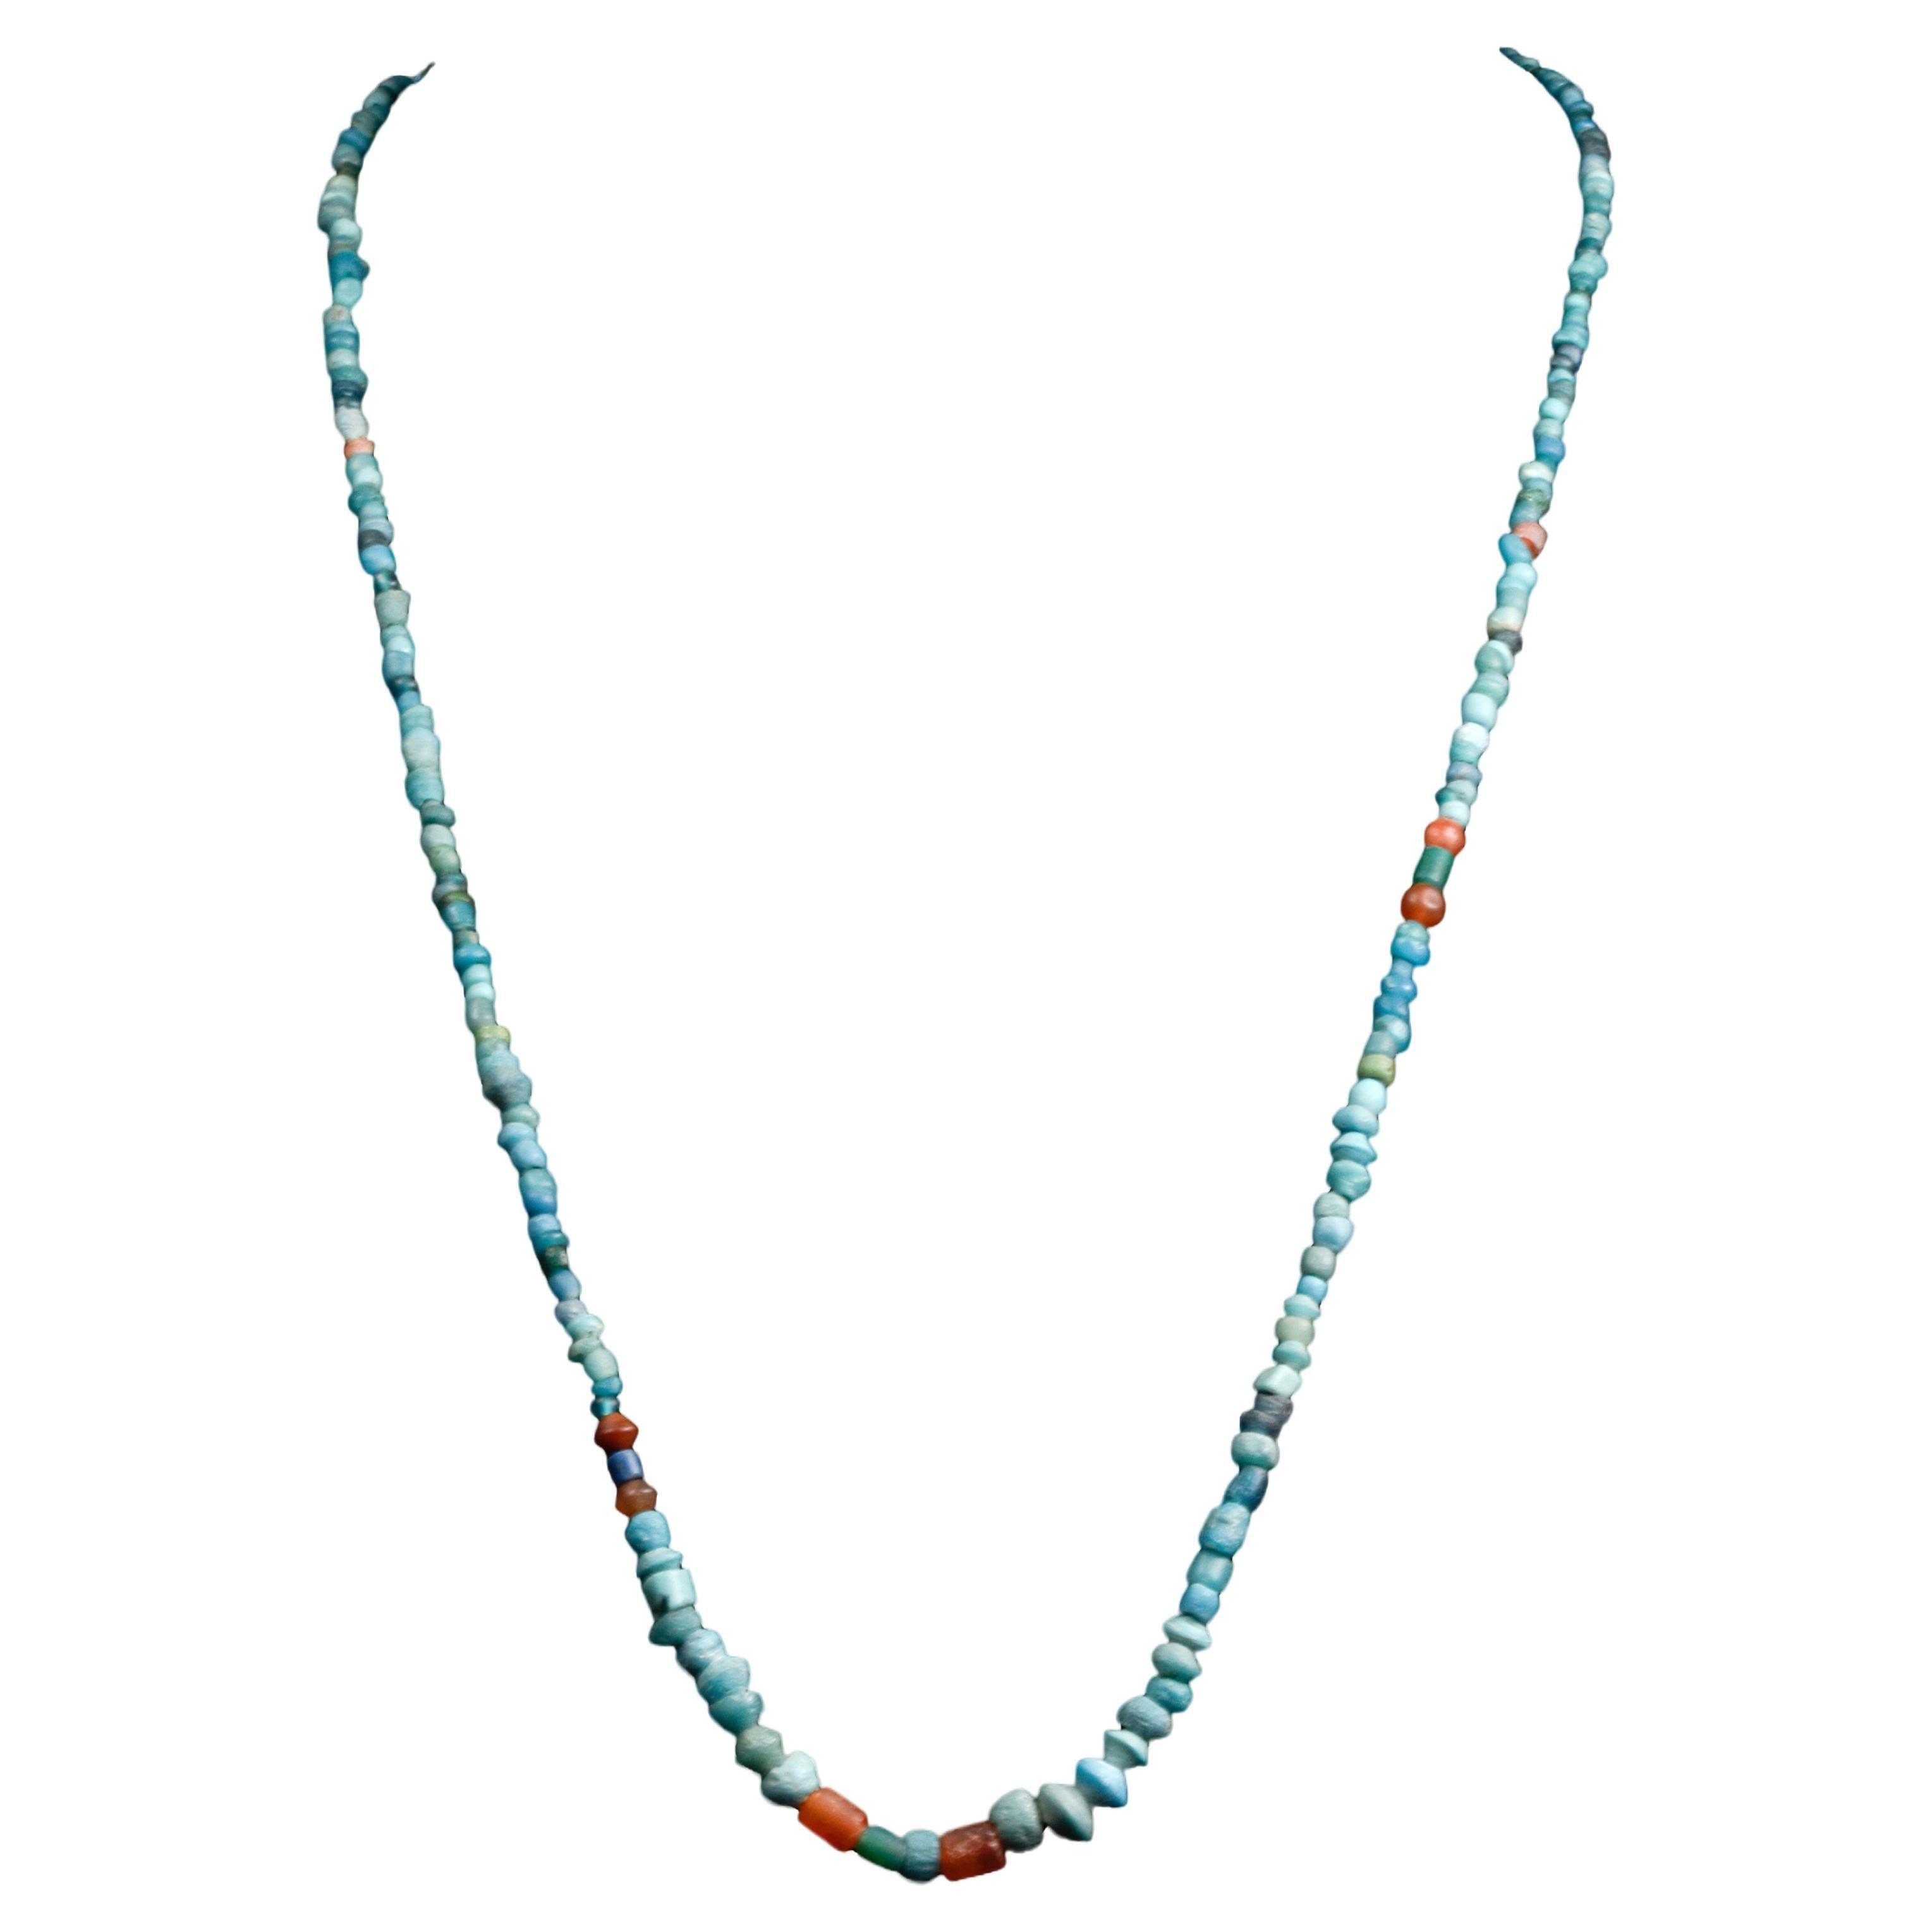 Roman Beaded Necklace For Sale